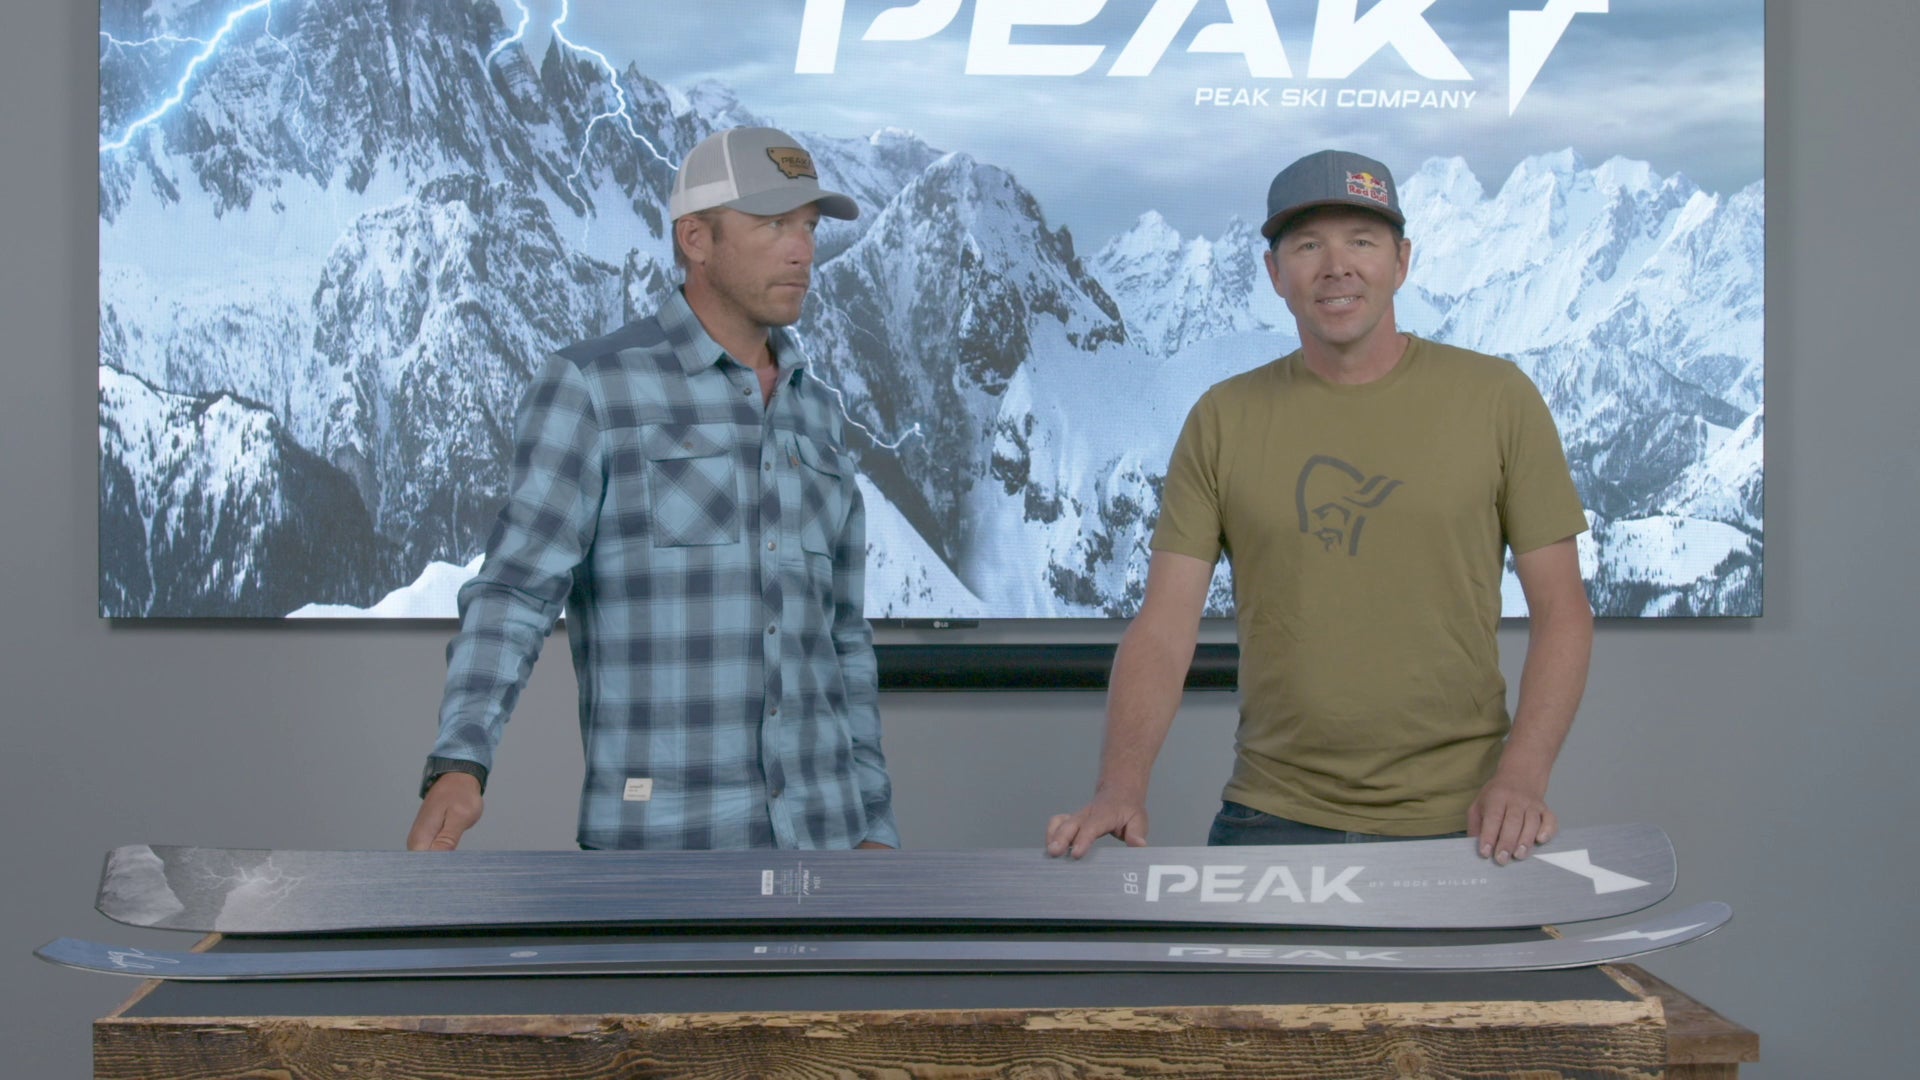 Load video: Peak 98 by Dav overview video